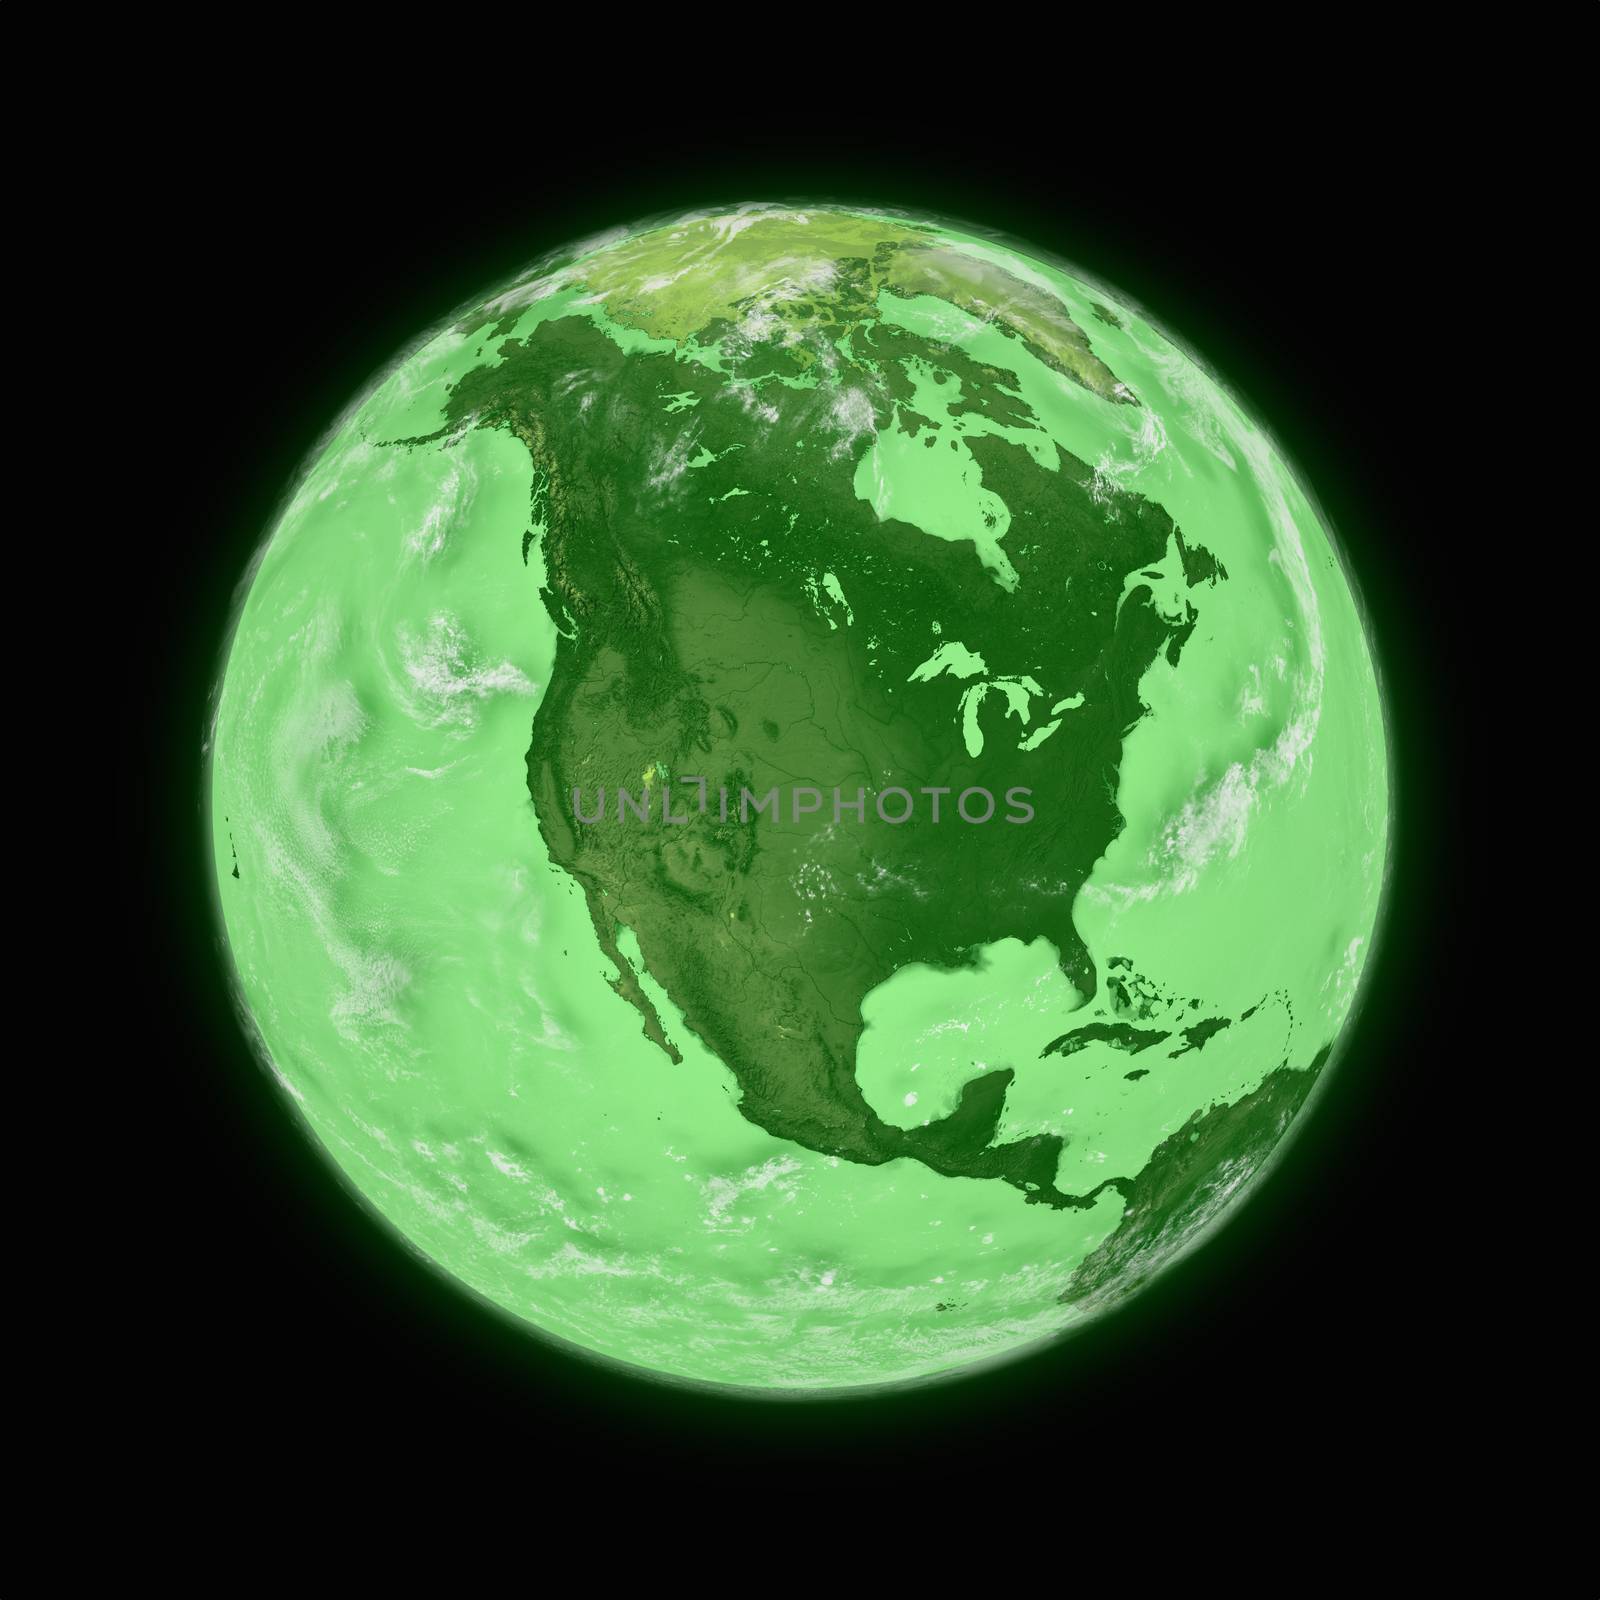 North America on green planet Earth by Harvepino